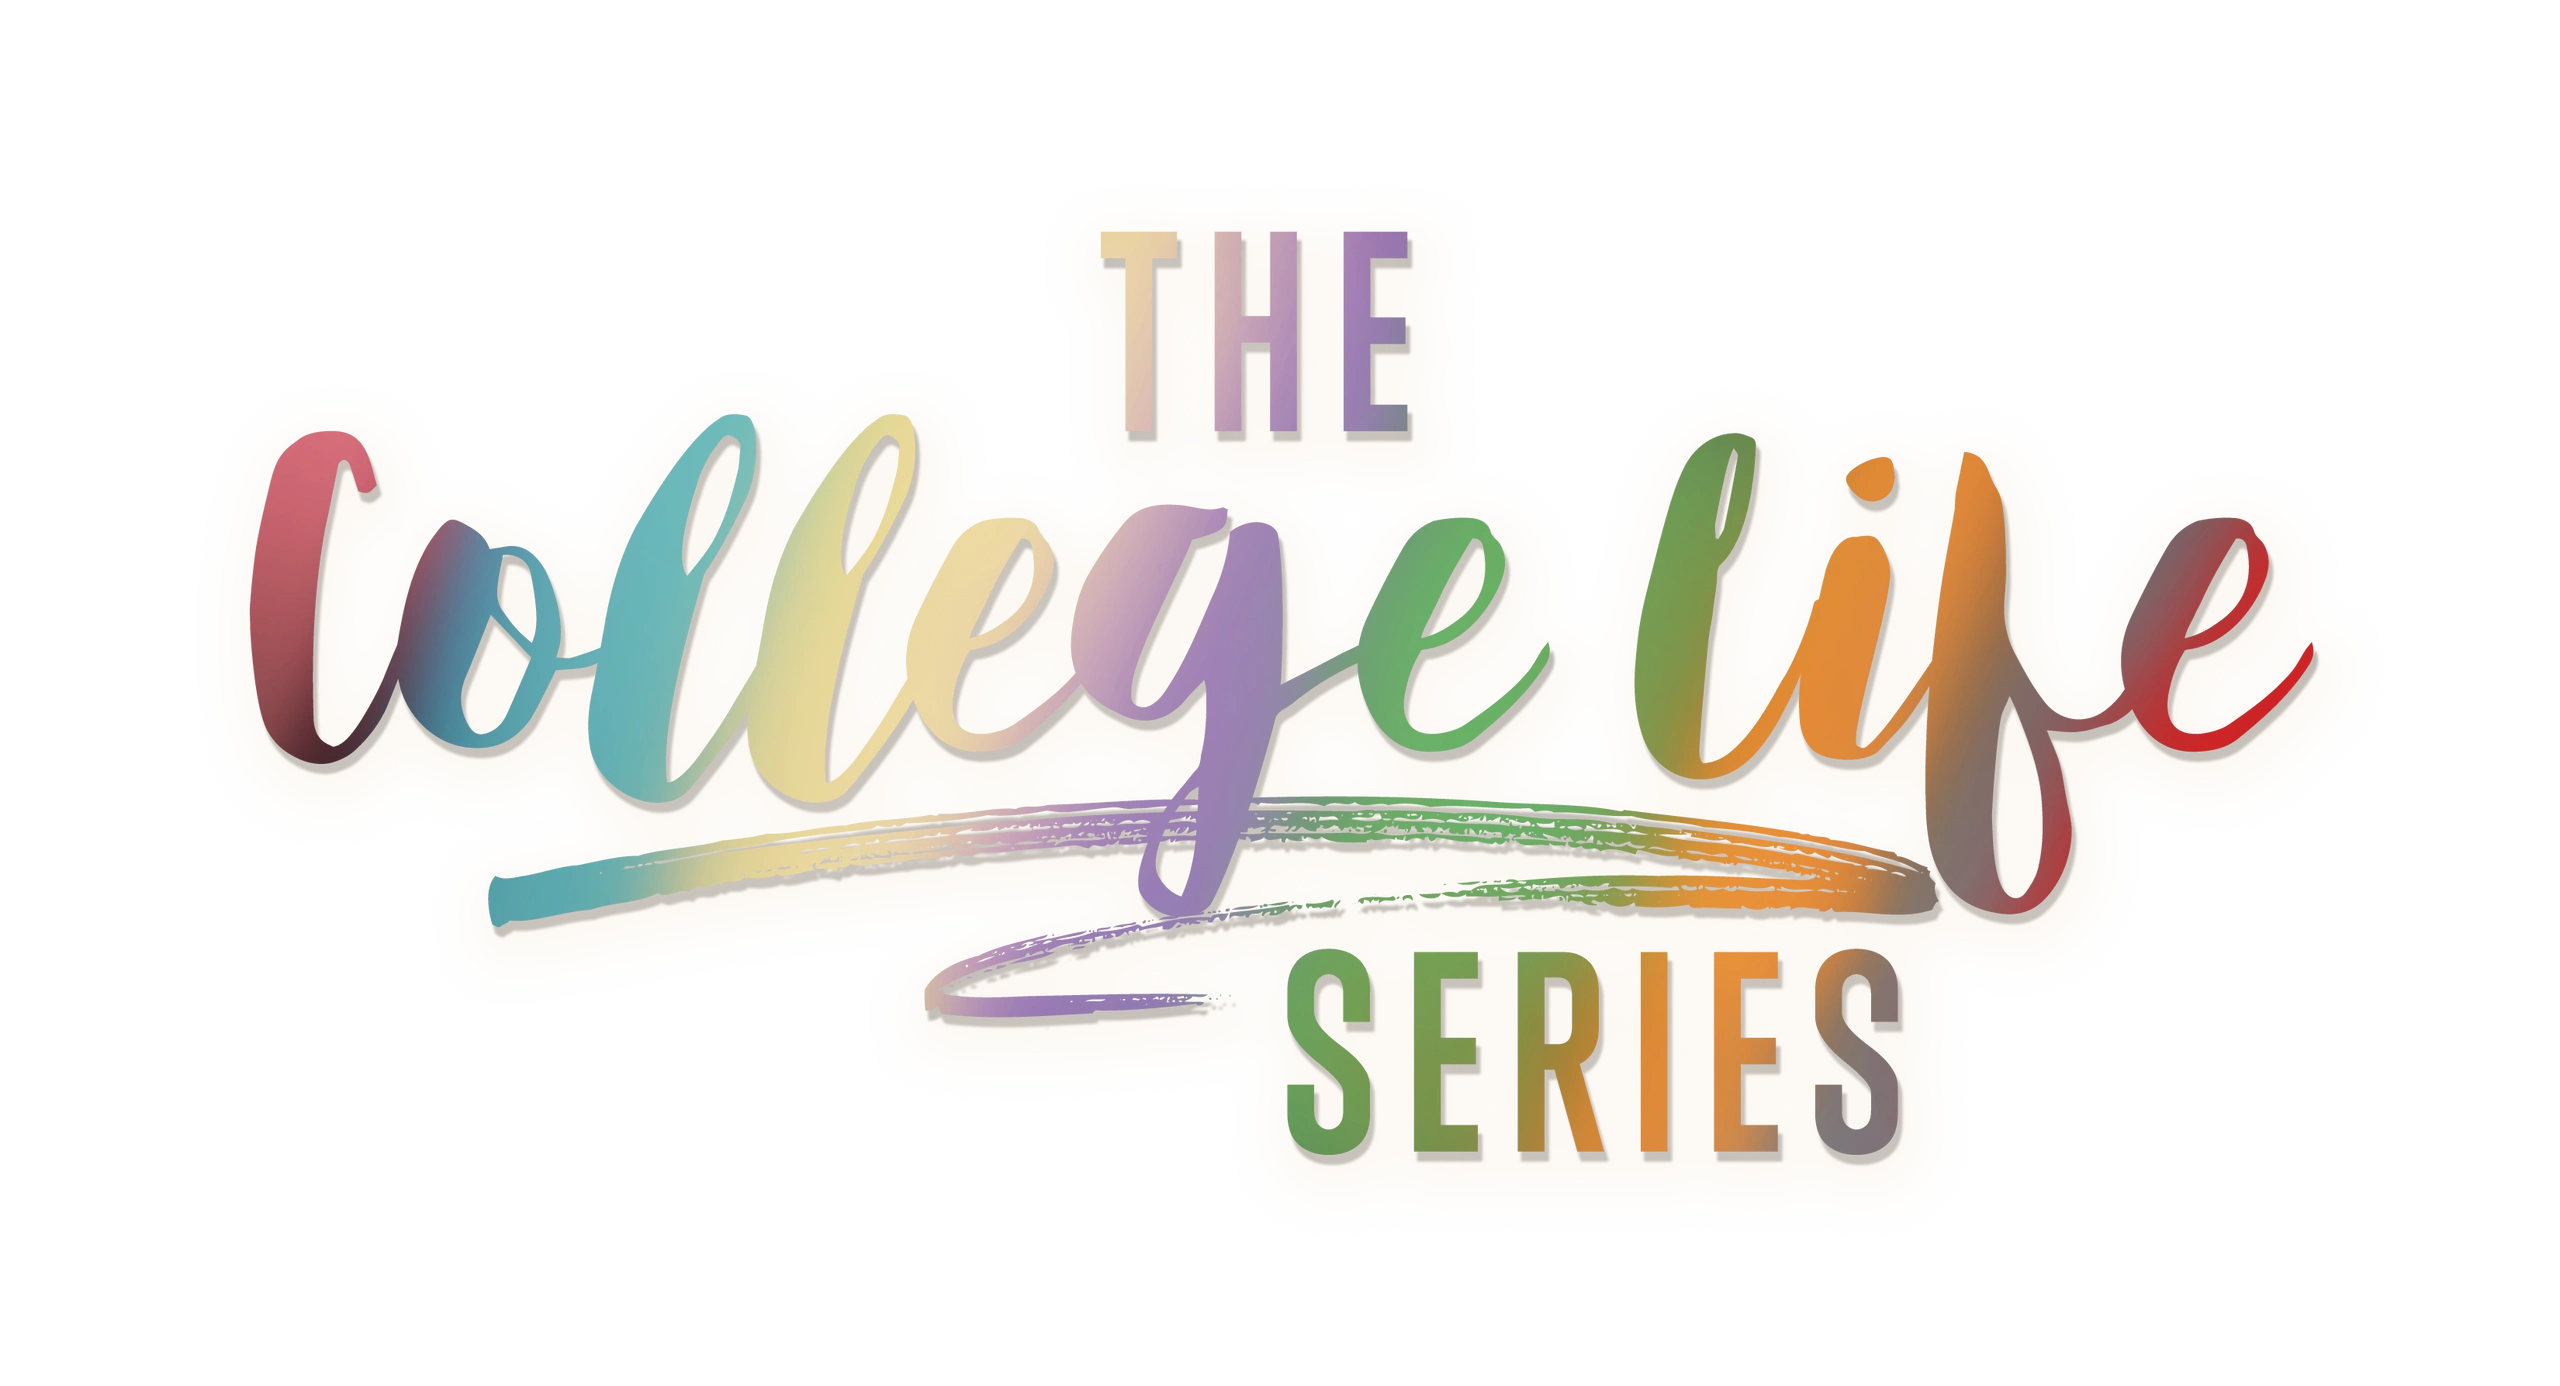 The College Life Series logo